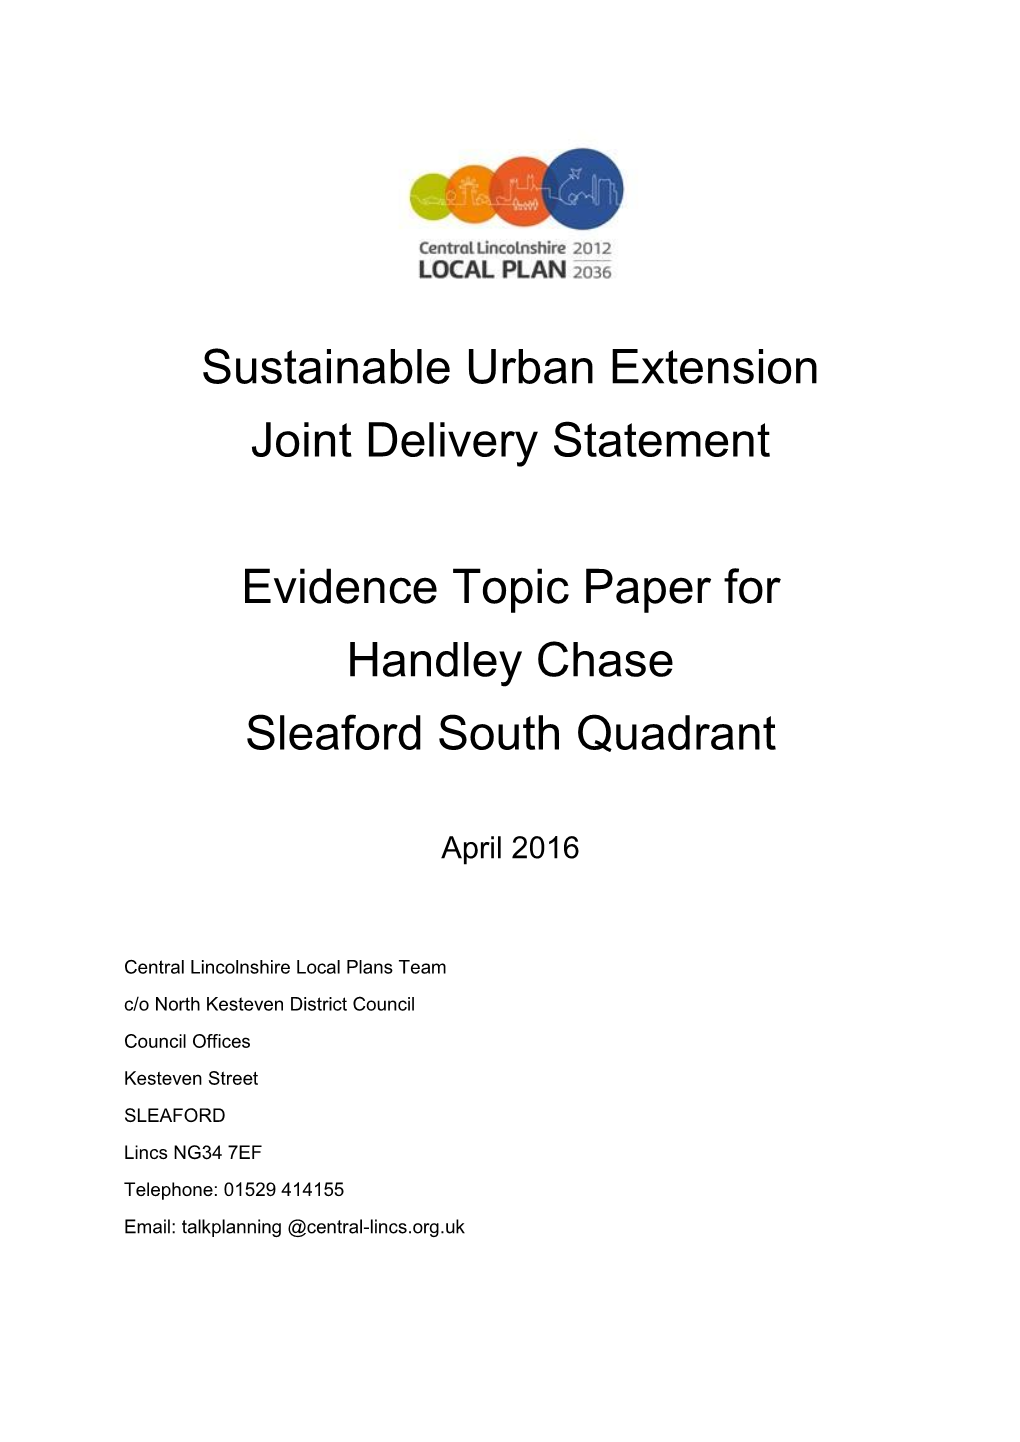 Sustainable Urban Extension Topic Paper: Sleaford South Quadrant